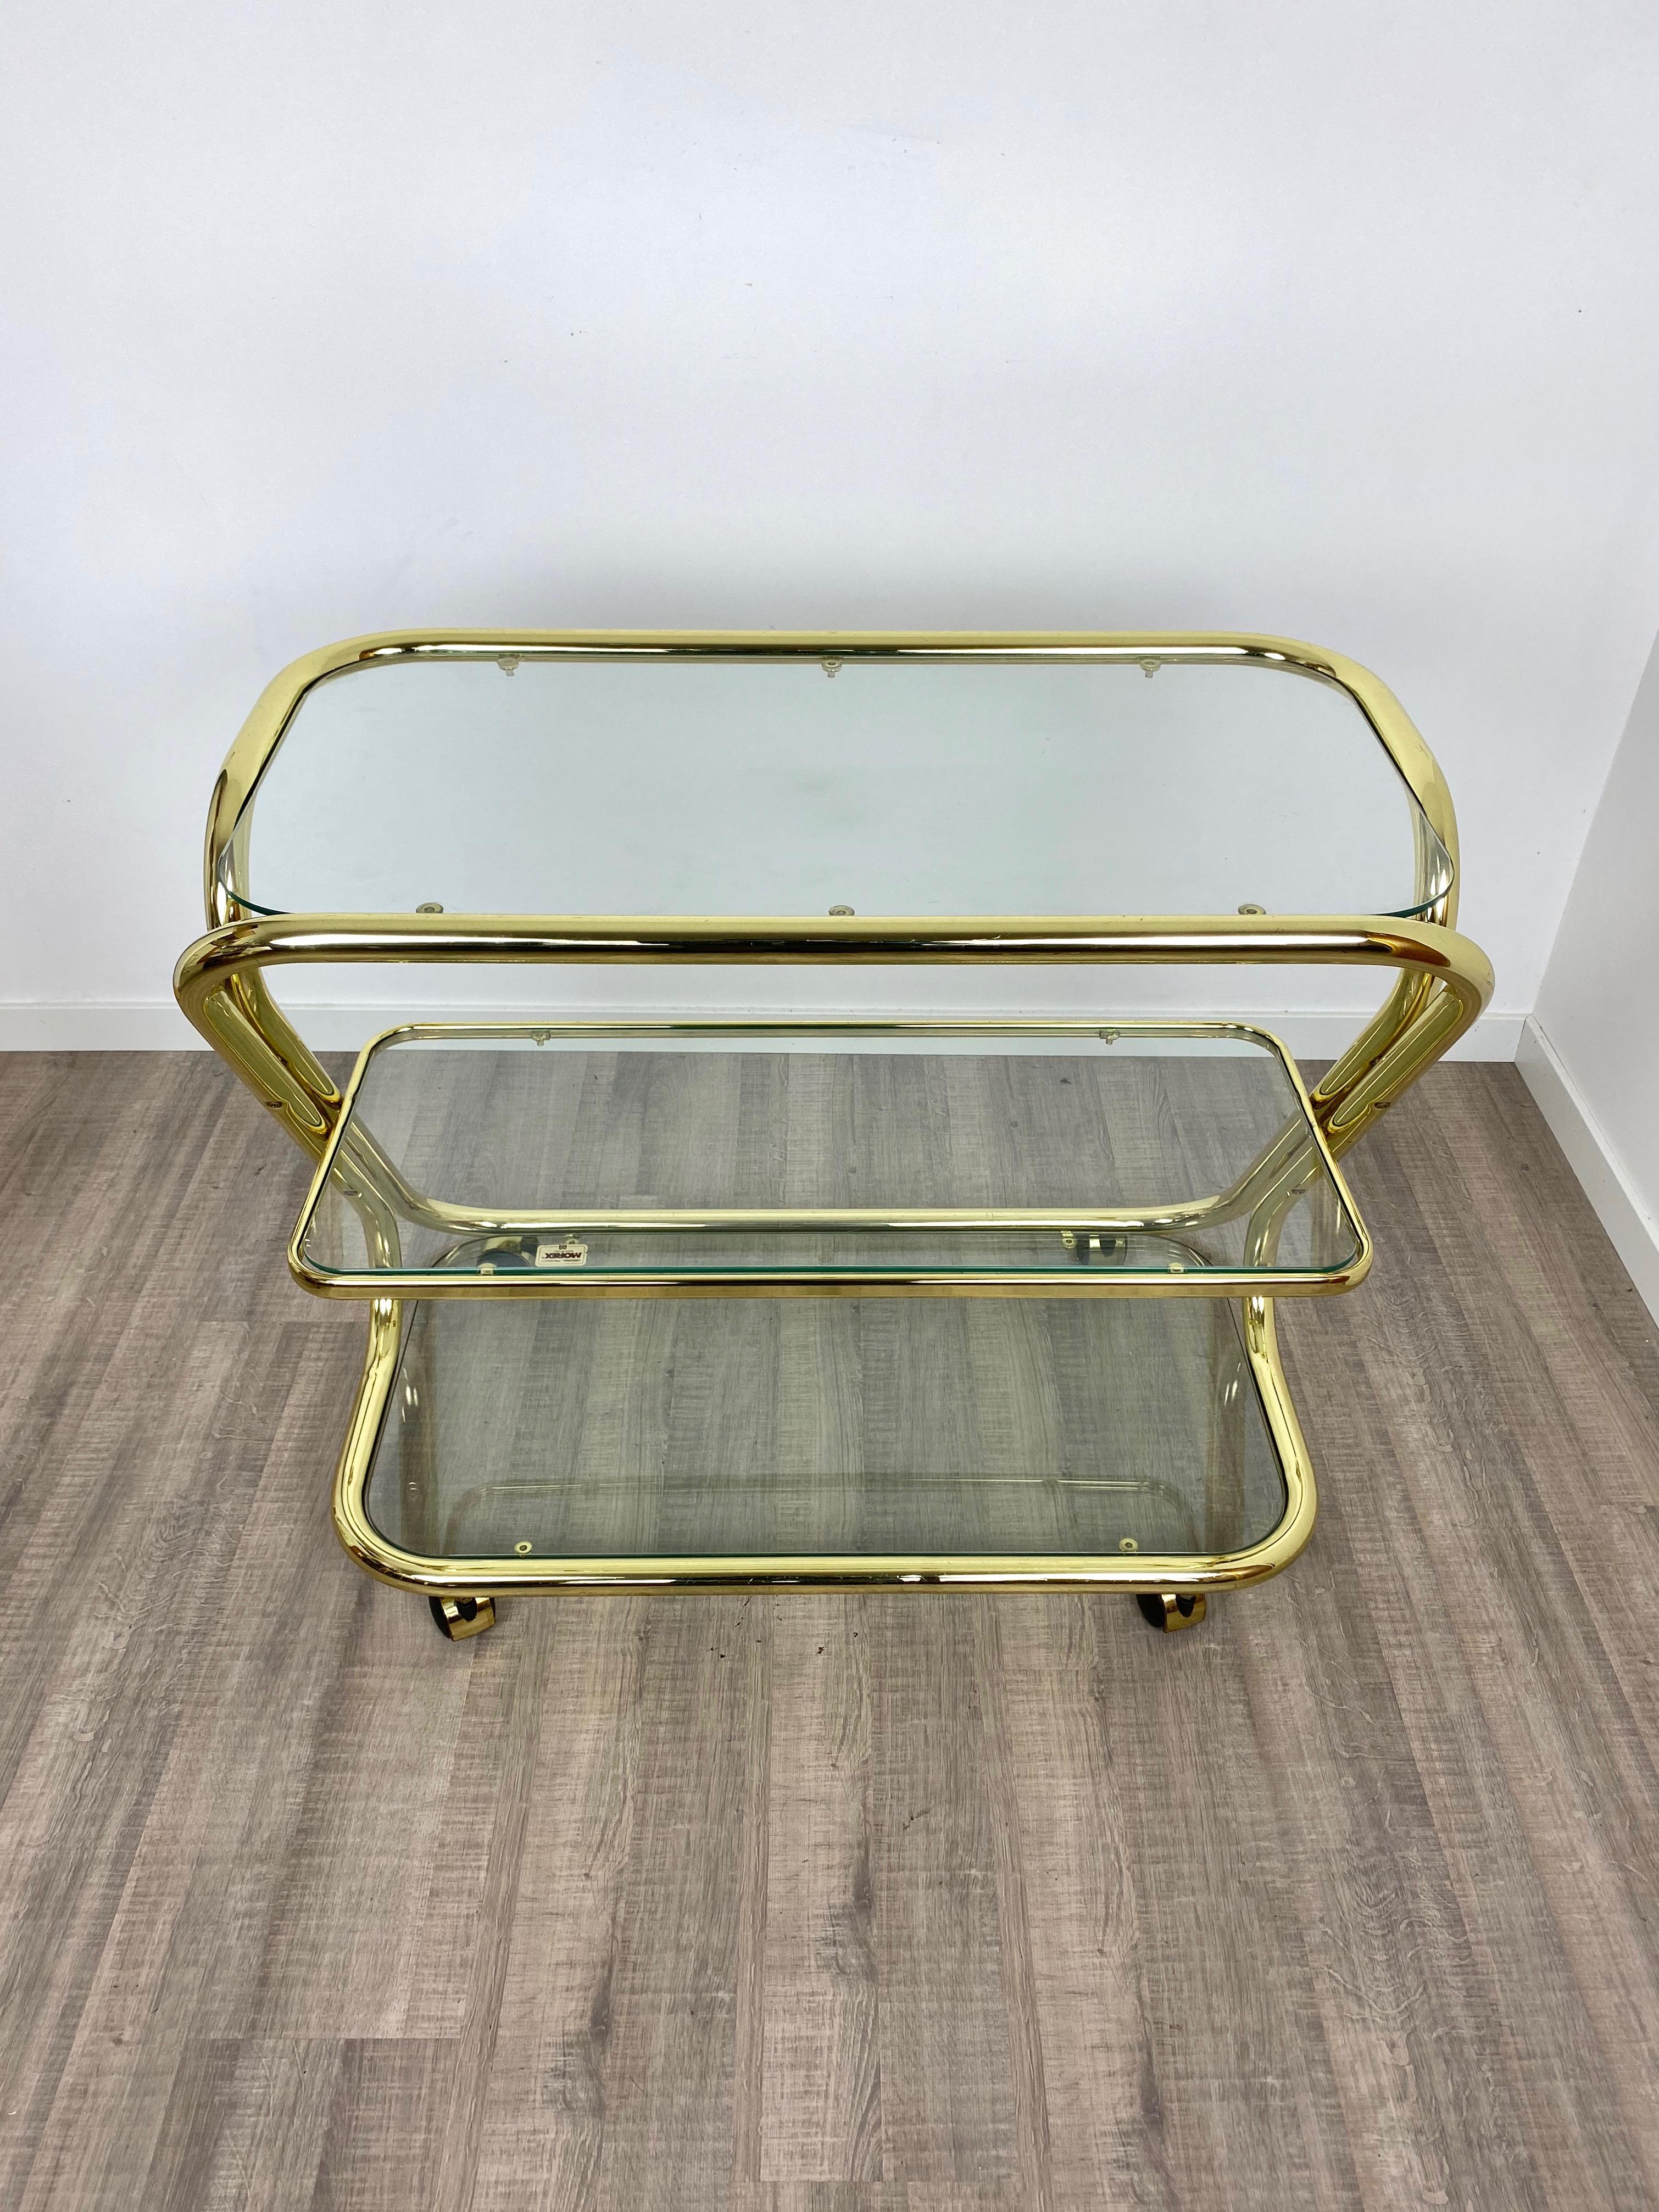 Serving Cart Trolley in Glass and Golden Metal by Morex, Italy, 1980s For Sale 8